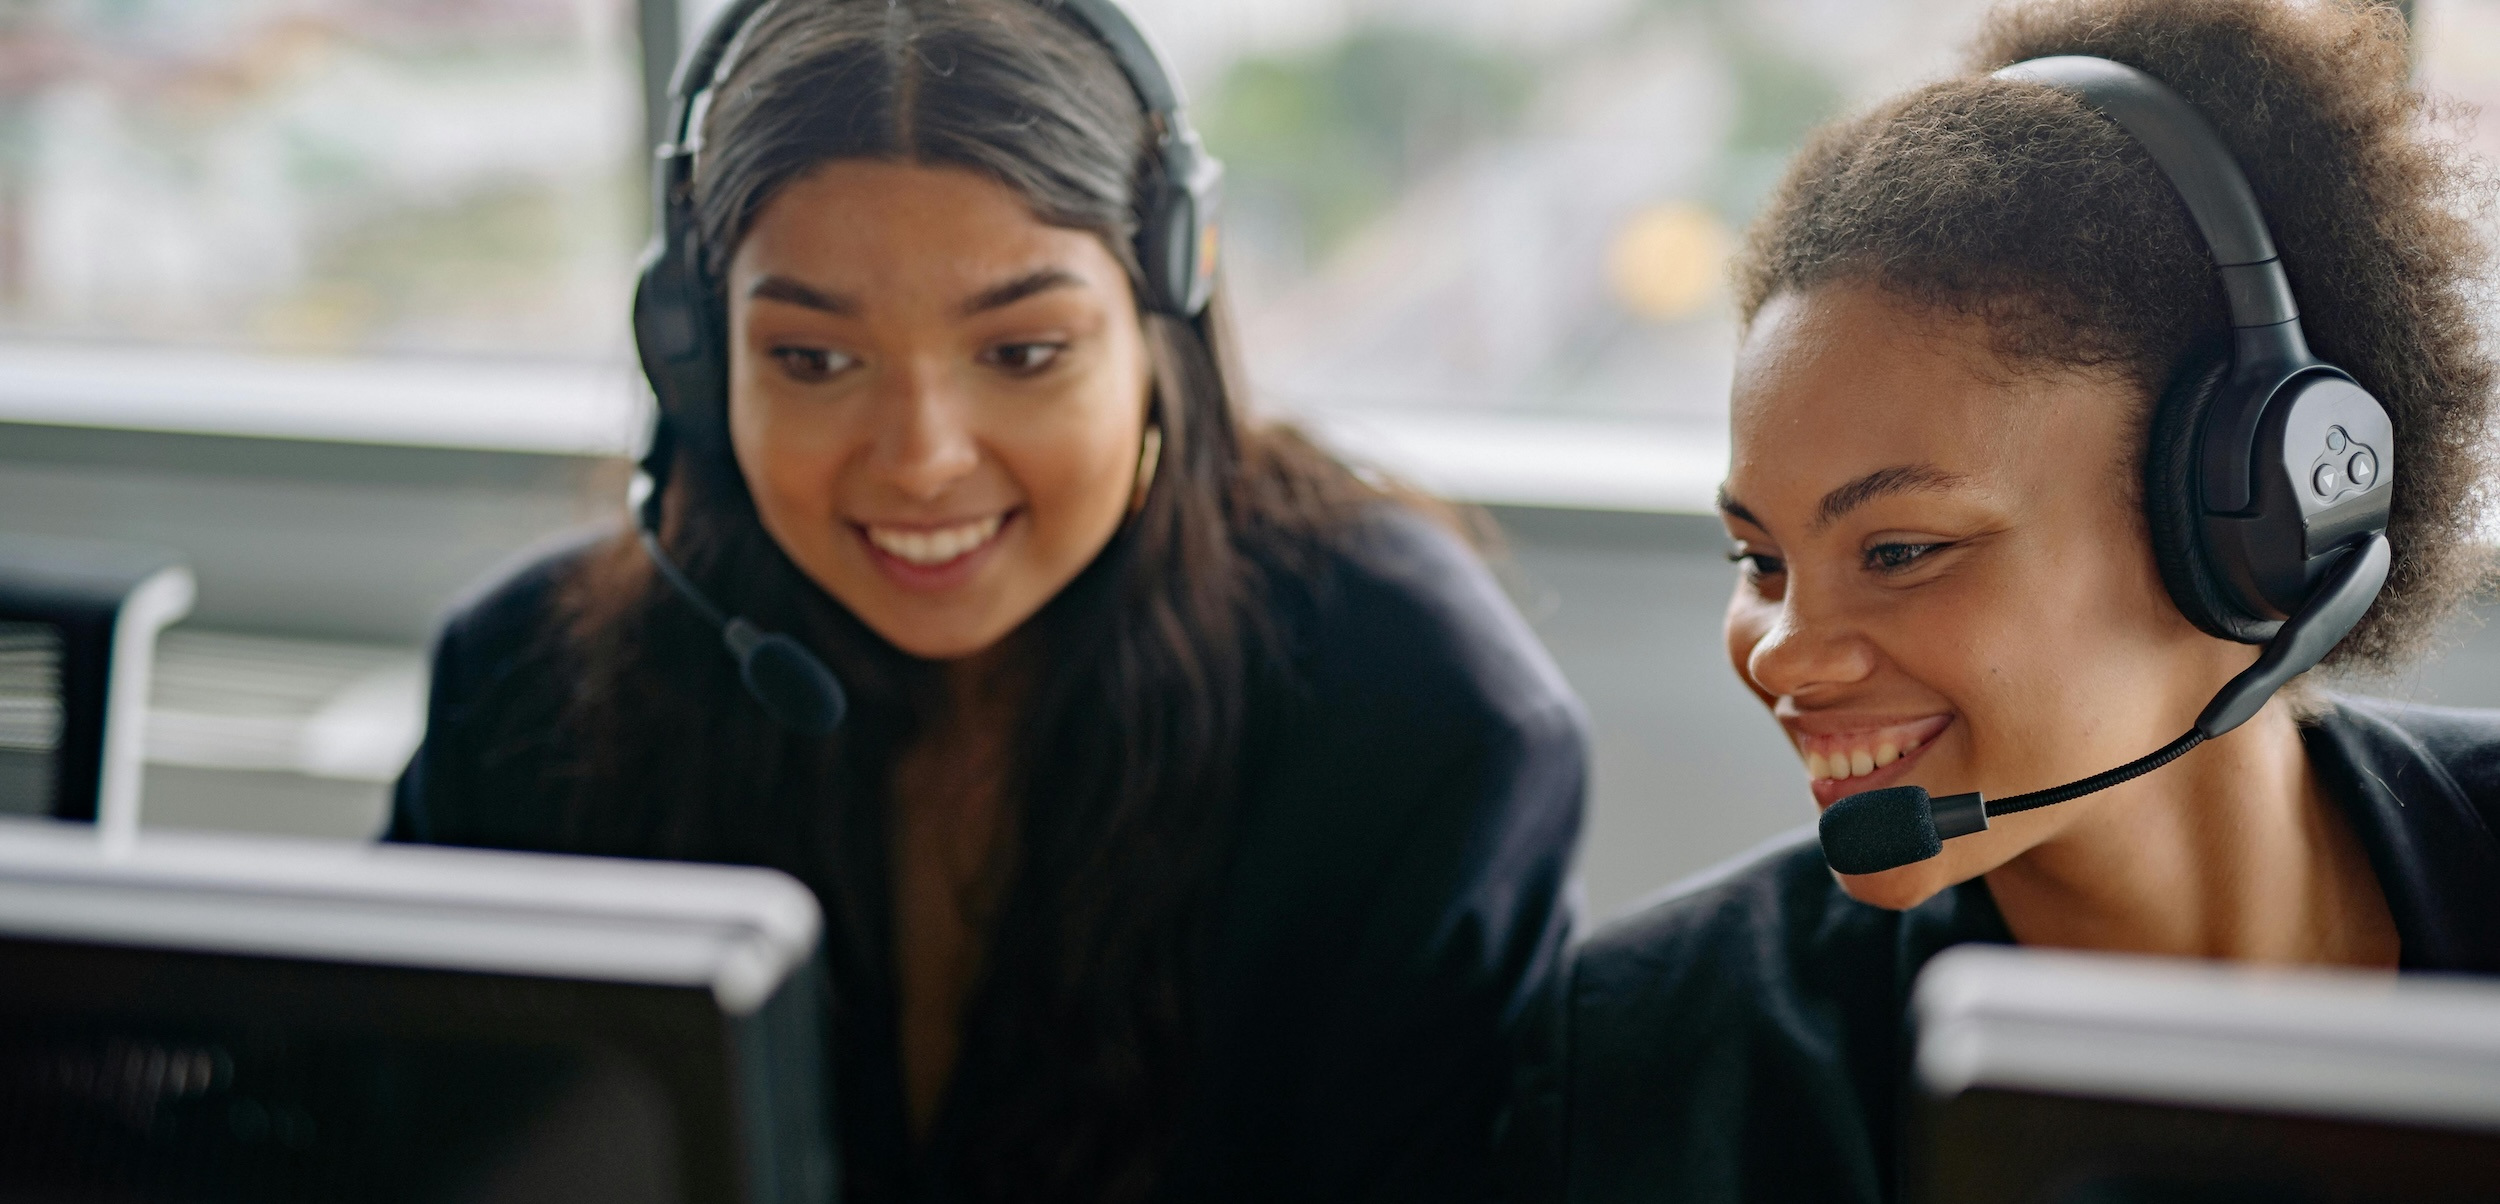 Two women smile wearing headsets inside of a call center.